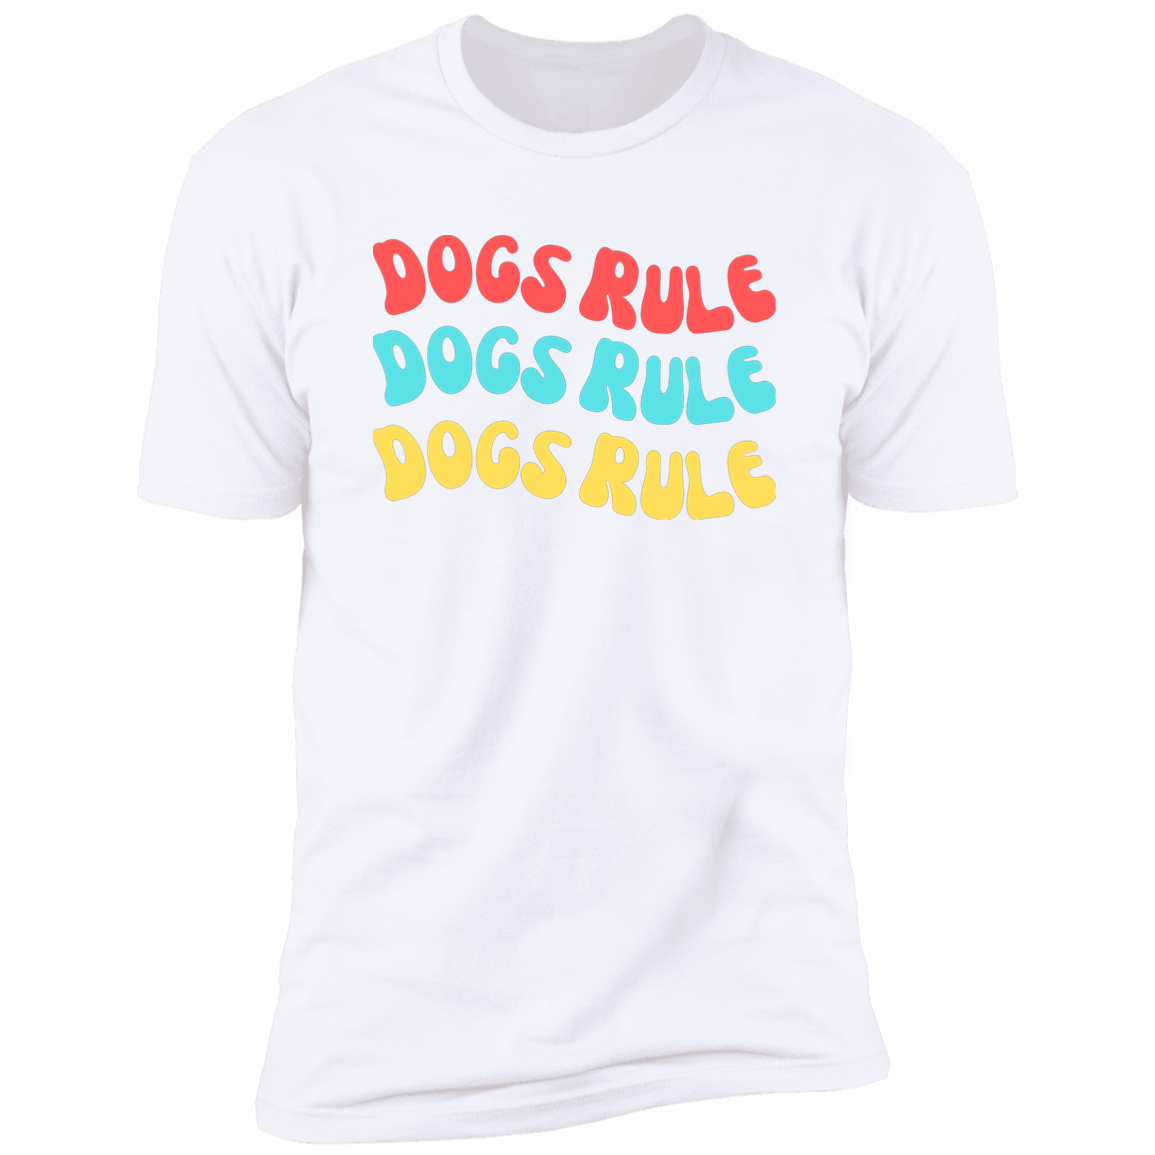 Dogs Rule Dog Shirt, dog shirt for humans, dog mom and dog dad shirt, in white